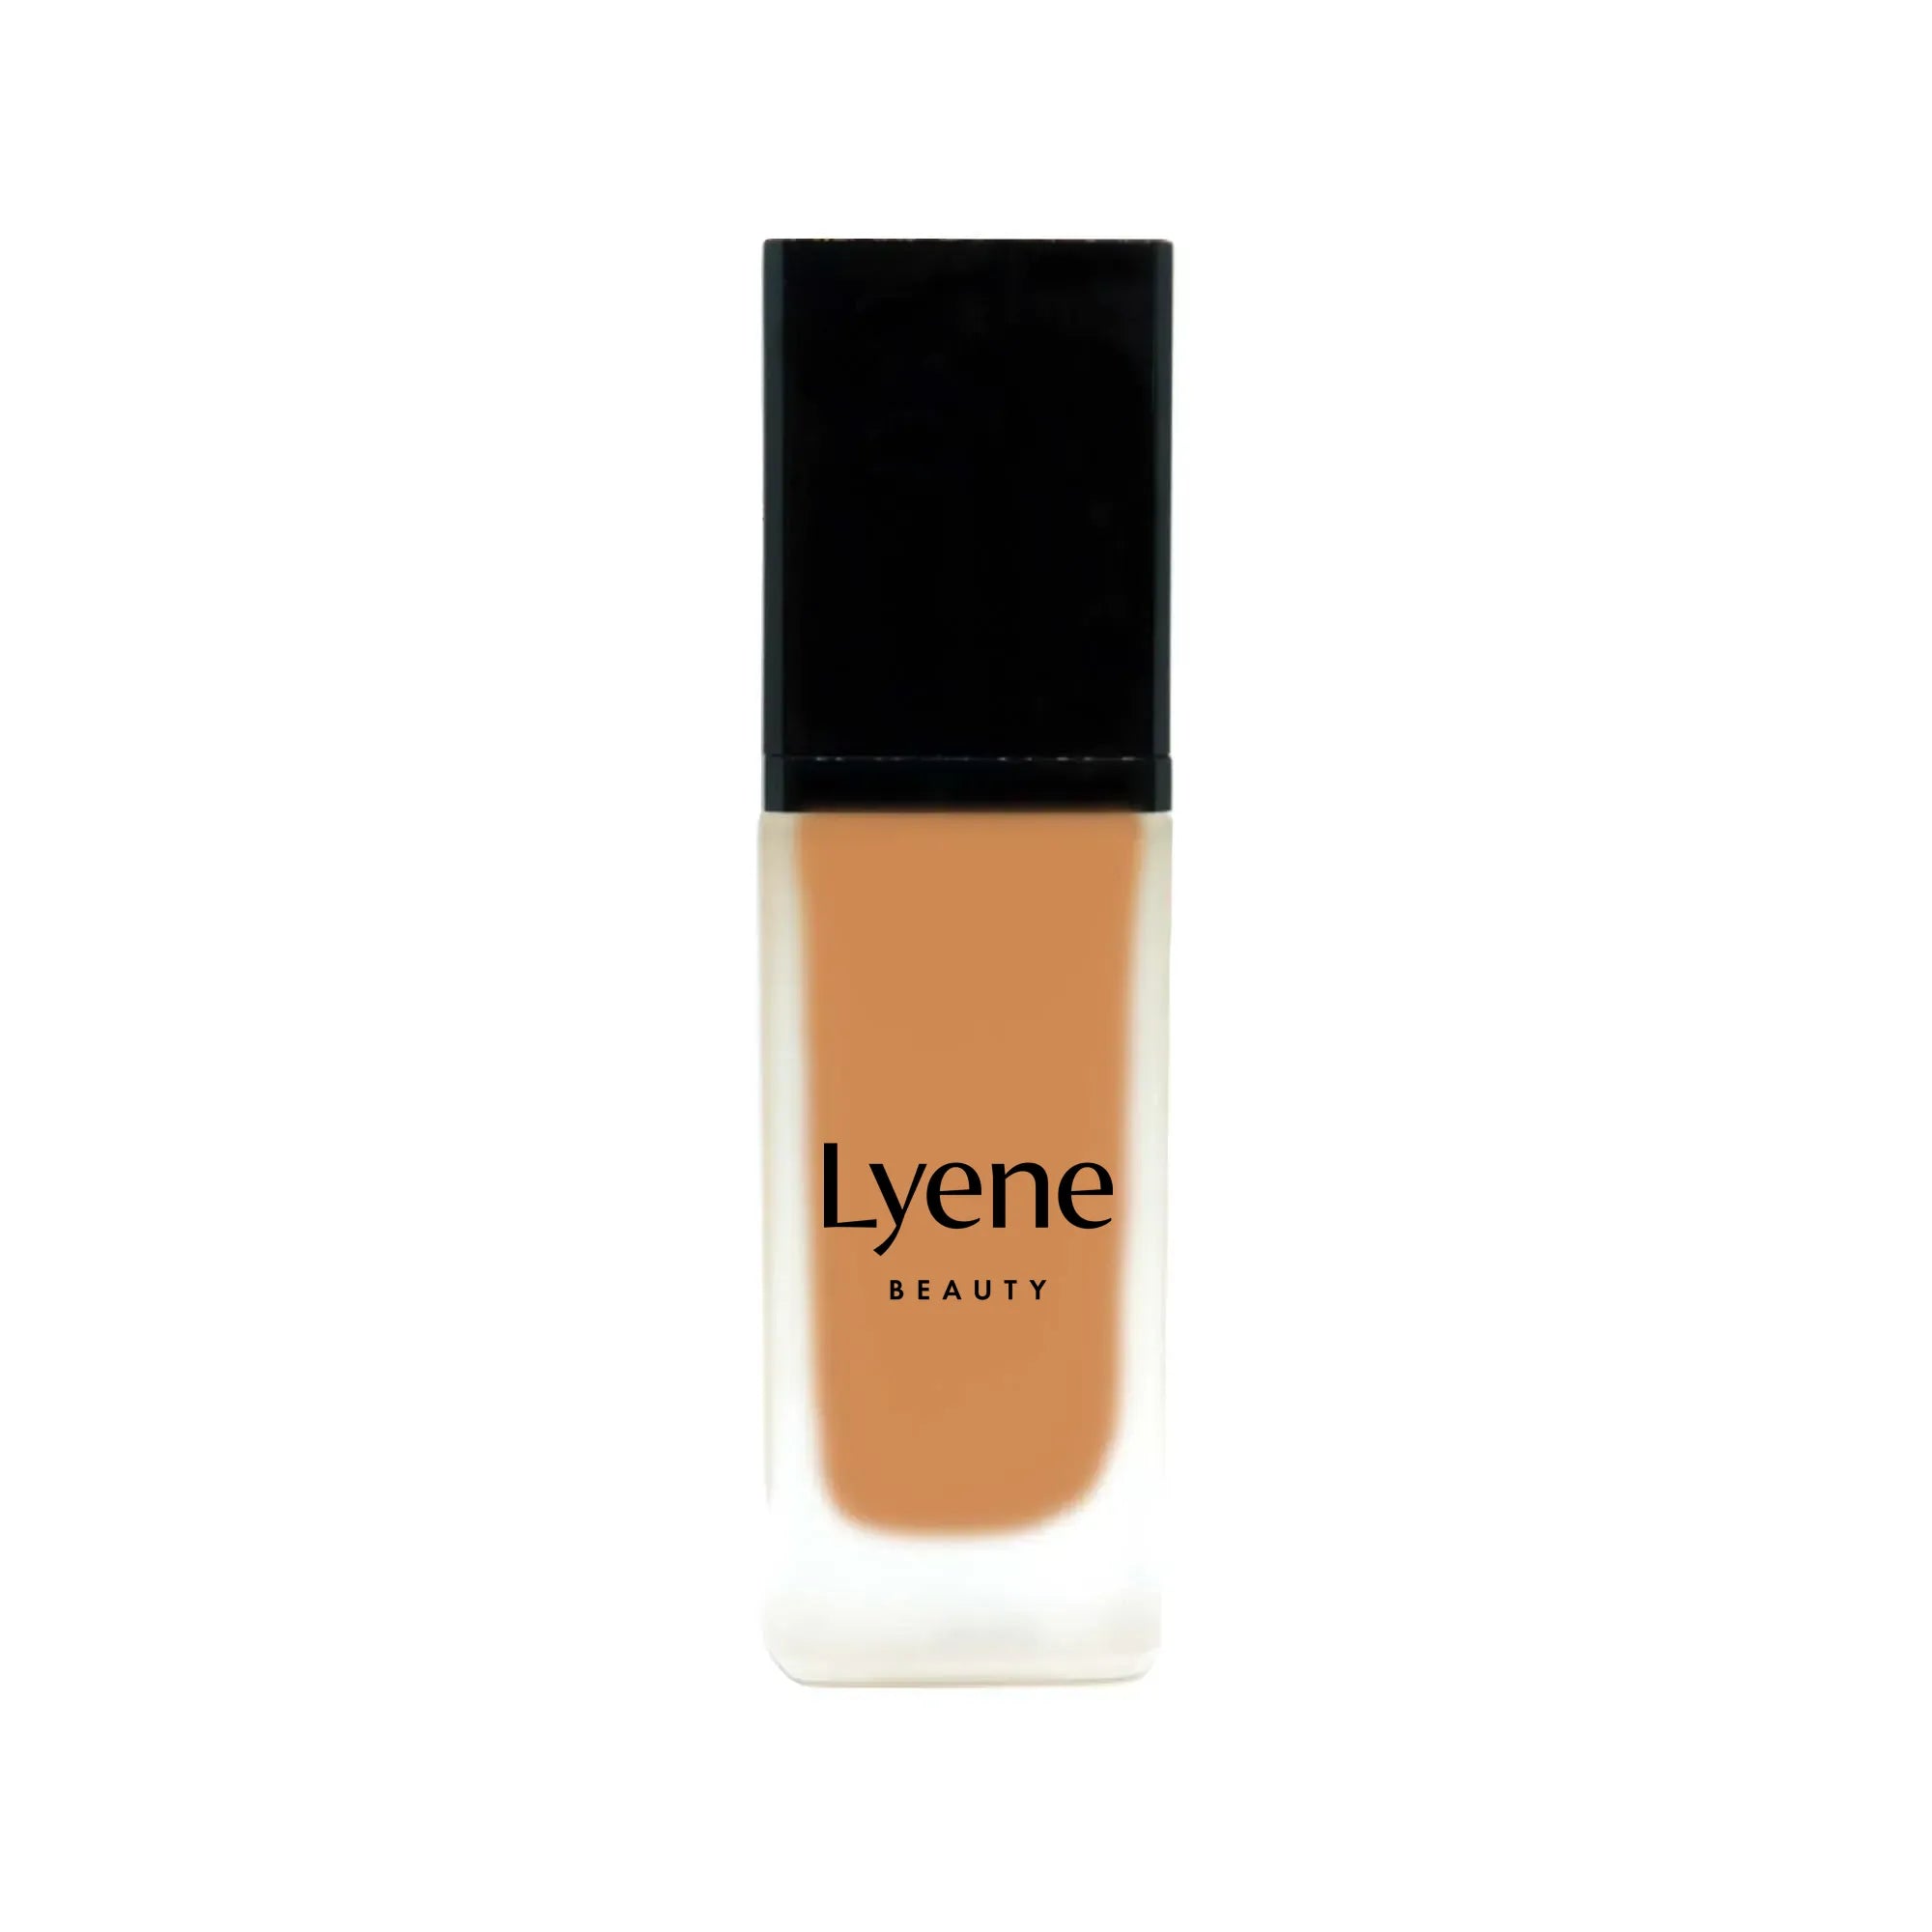 Foundation with SPF - Marigold - Foundation with SPF - Marigold